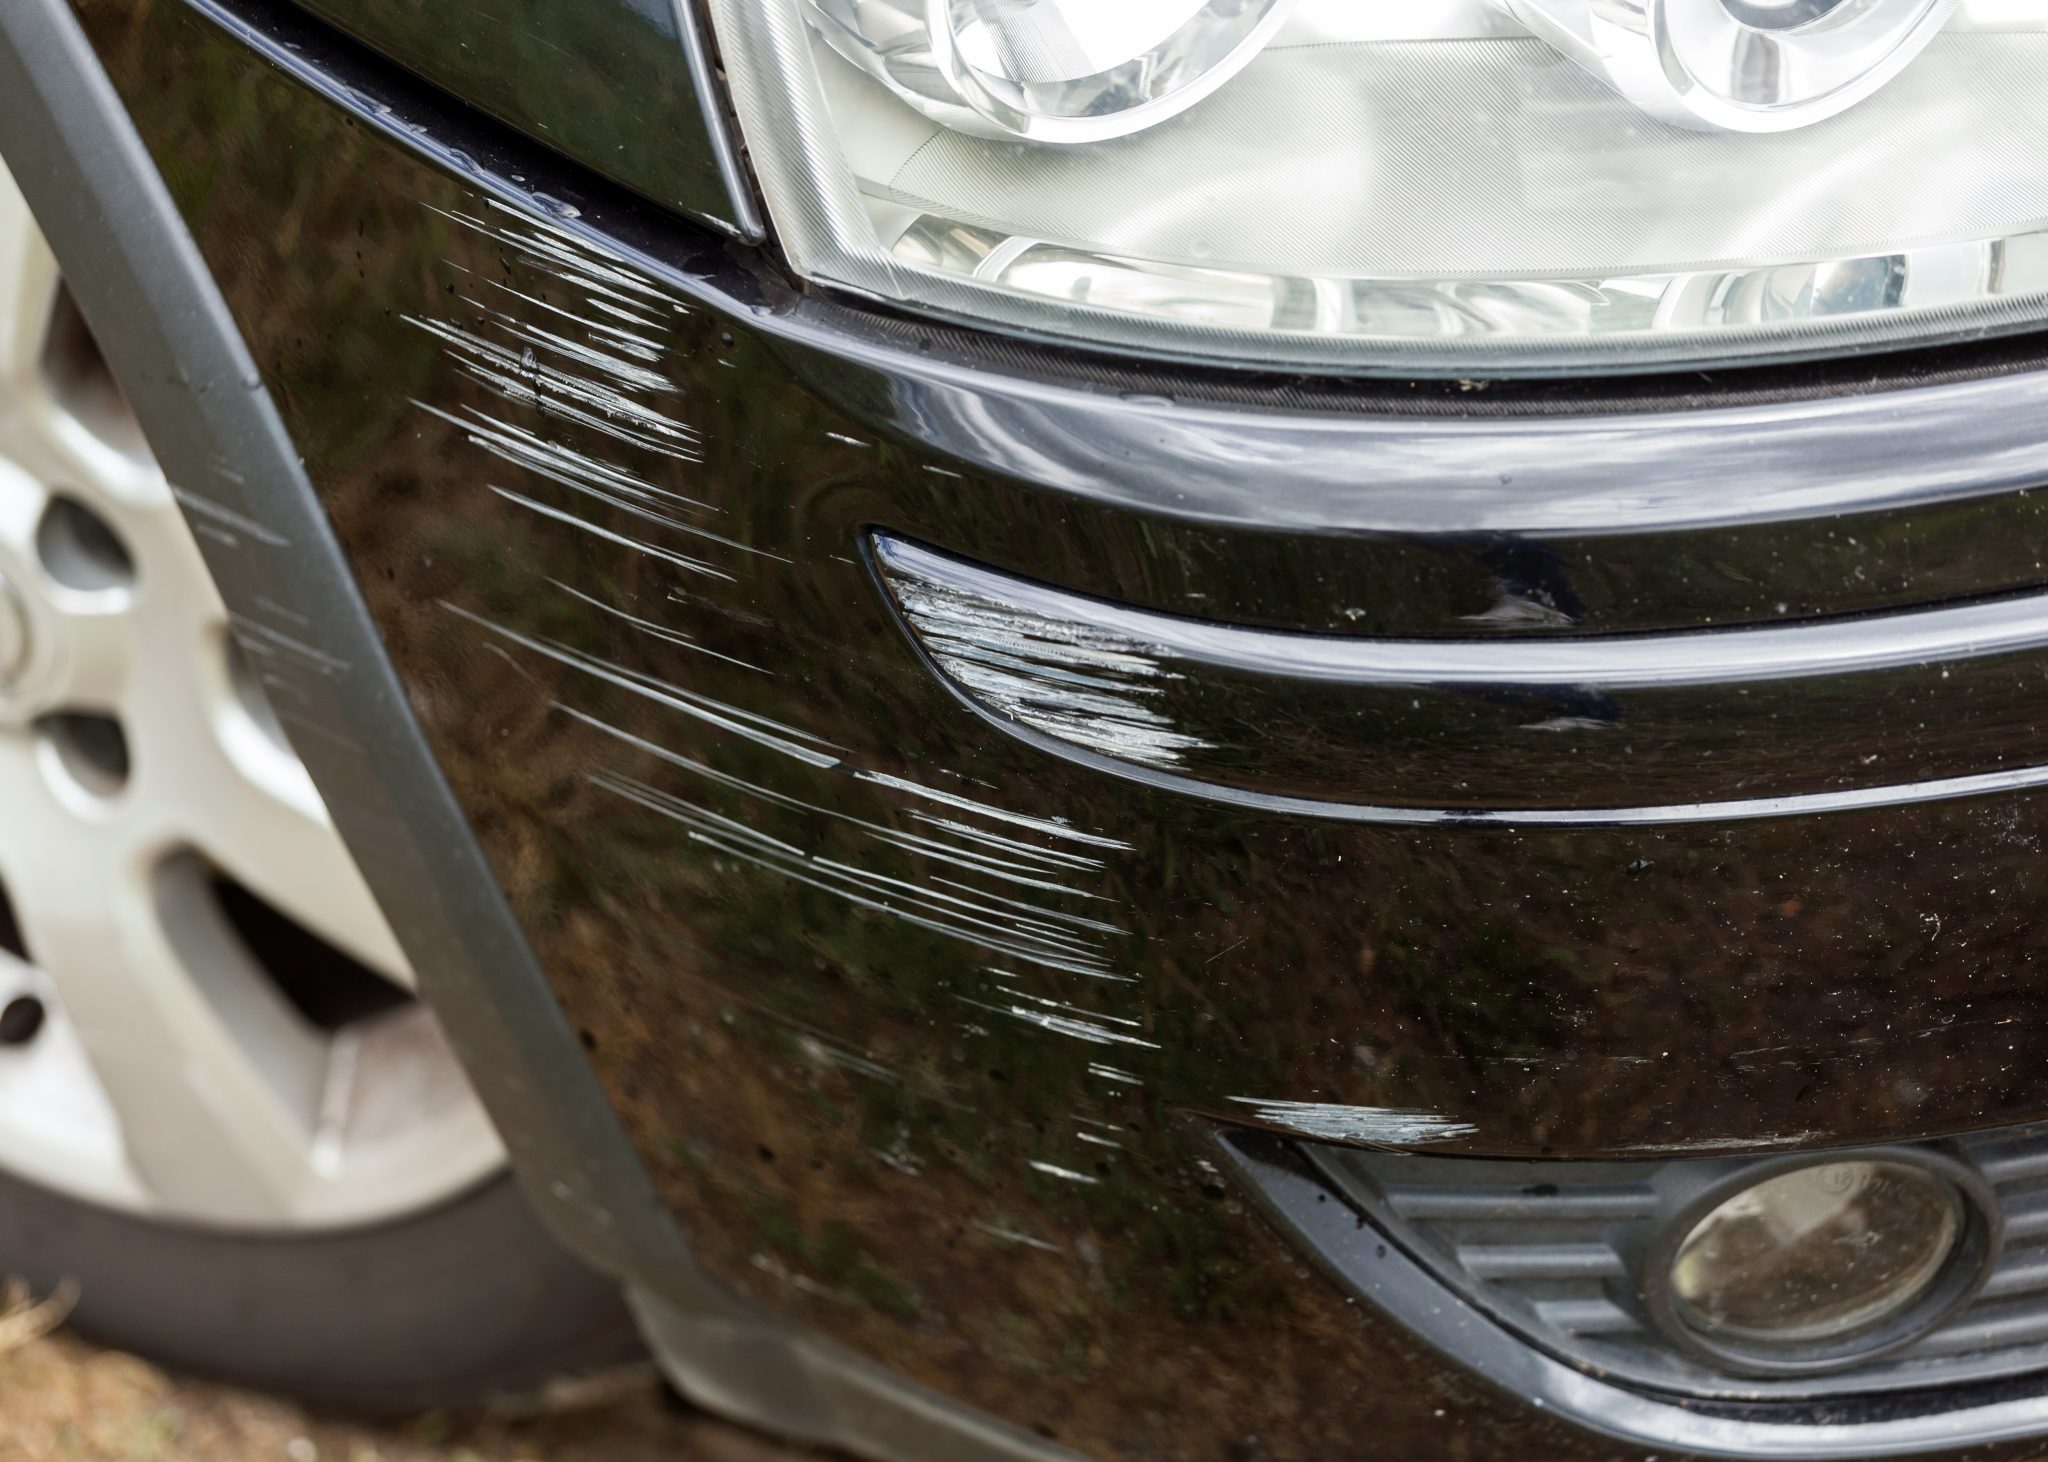 Learn how to buff out a car scratch with these tips and perhaps a professional’s help.